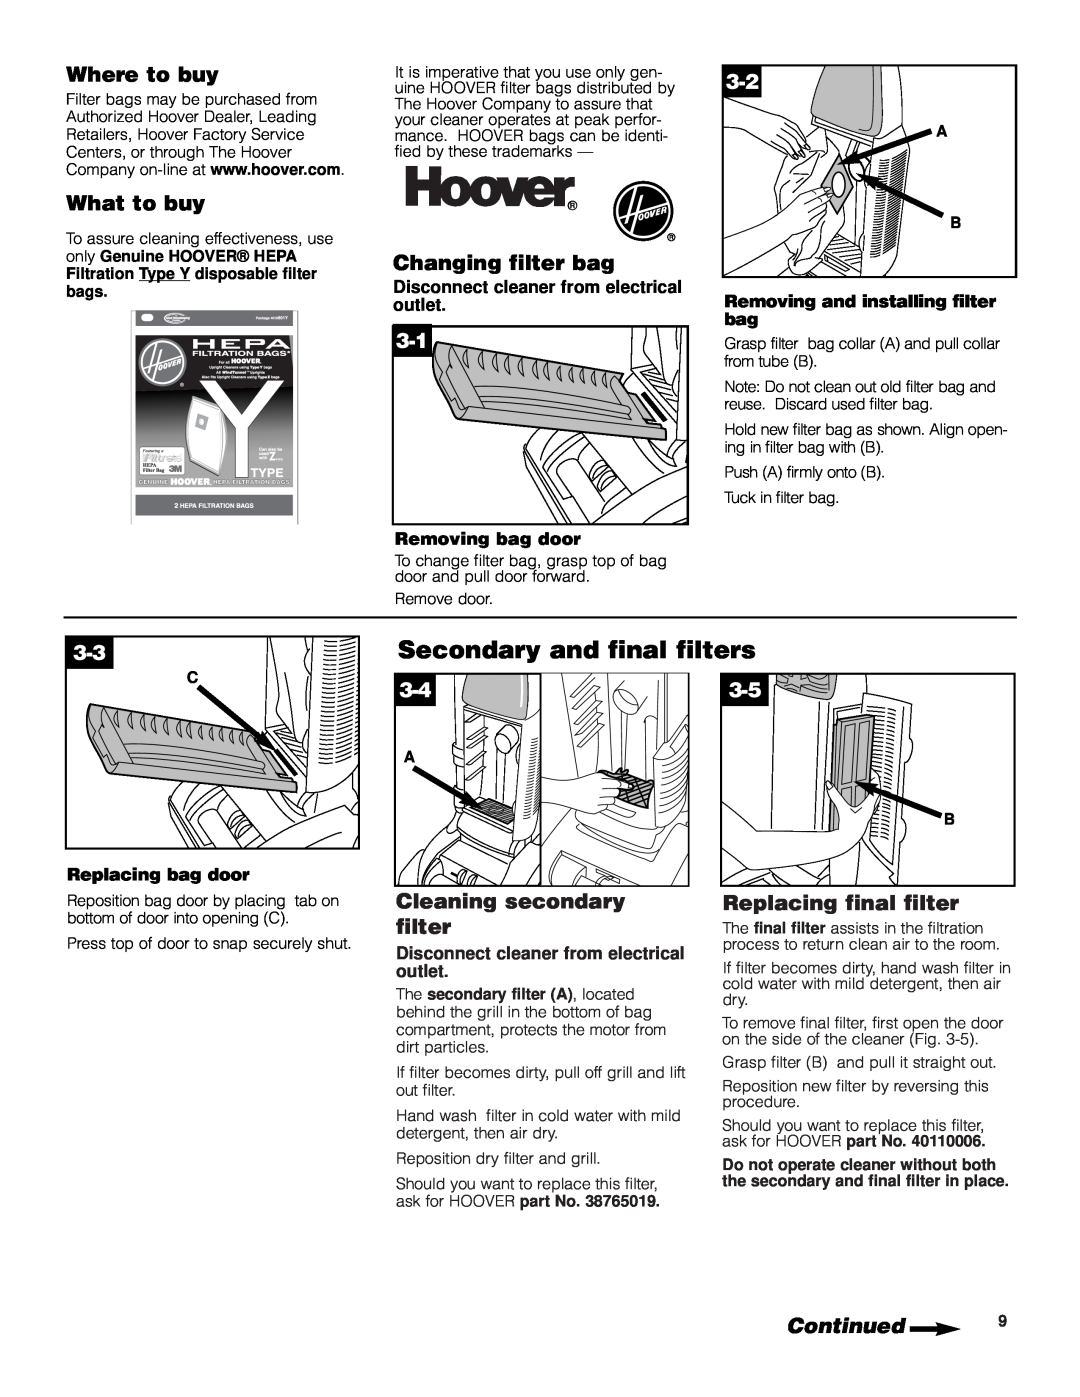 Hoover UH70600 Secondary and final filters, Where to buy, What to buy, Changing filter bag, Cleaning secondary filter 